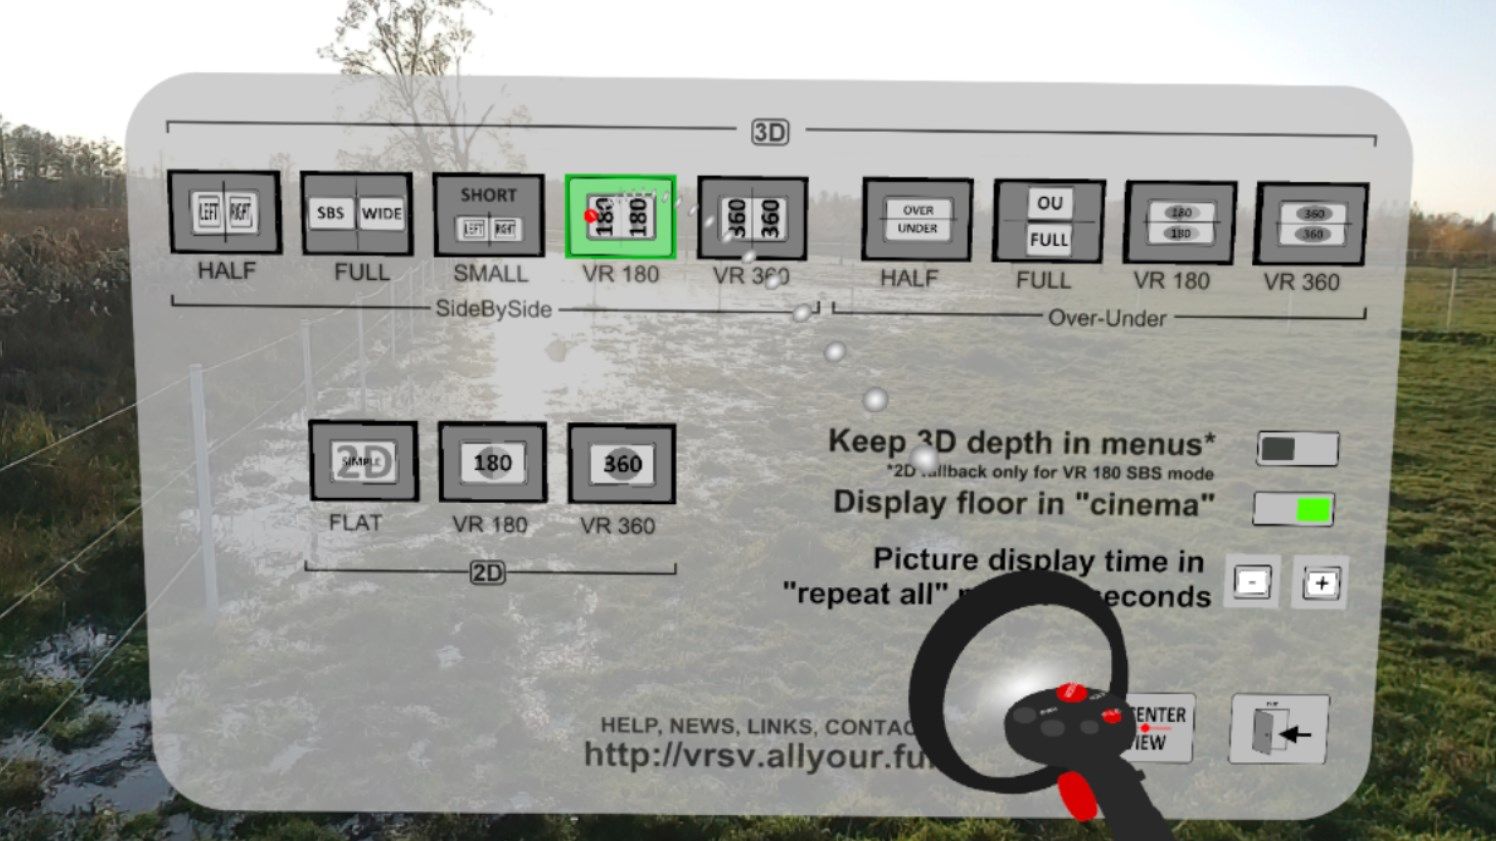 In every display mode, there is quick access to settings panel that allows the User choose the file's format to play it correctly, as well as adjust time of slideshow auto-advance or behavior when playing 180VR 3D content (fallback to 2D increases comfort of viewing when UI controls are shown).